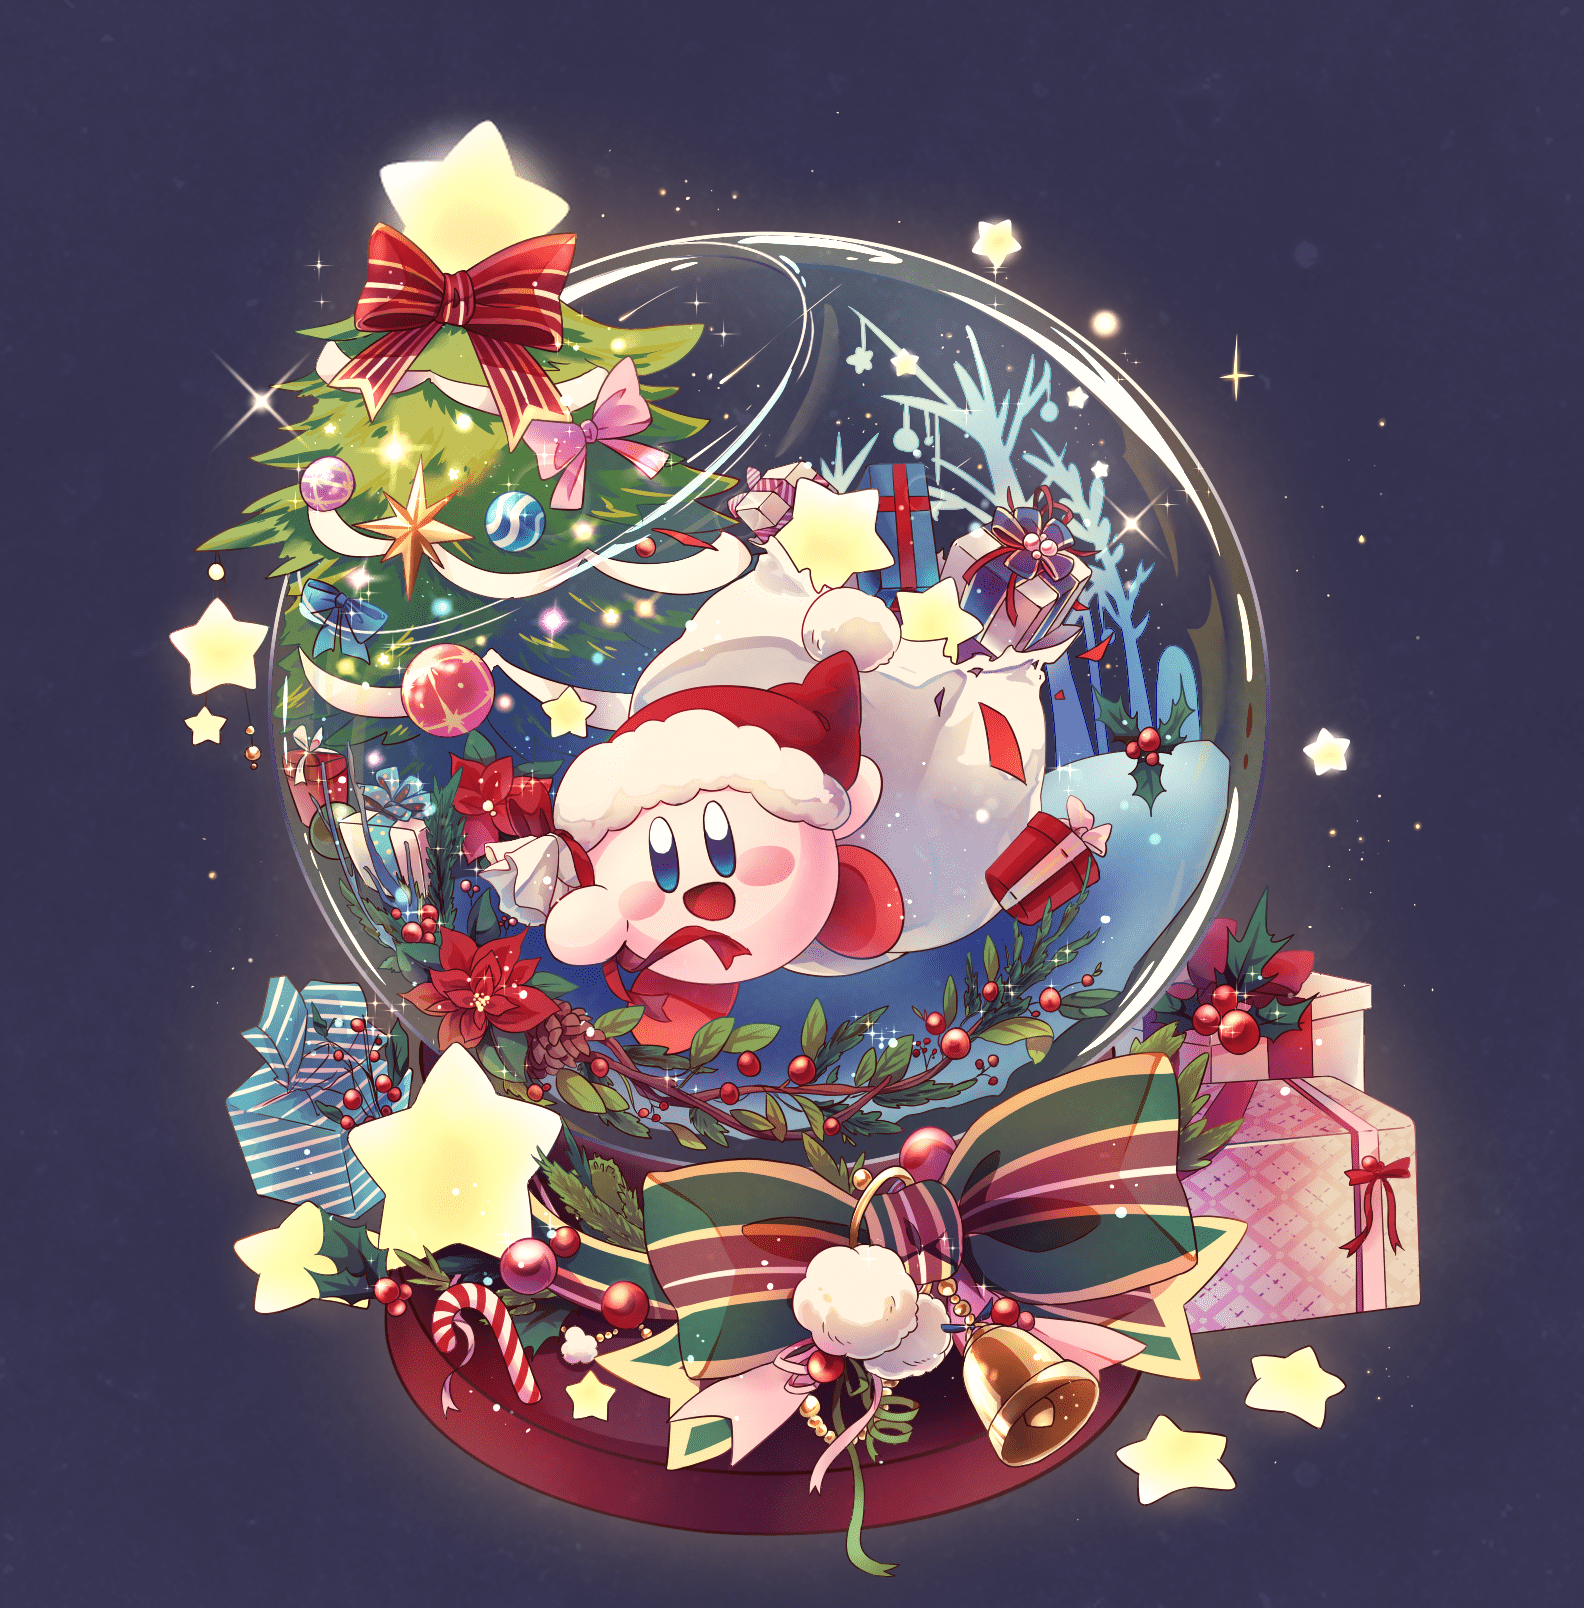 Cute 94 Kirby Christmas background High-quality, free to download Kirby Christmas backgrounds.